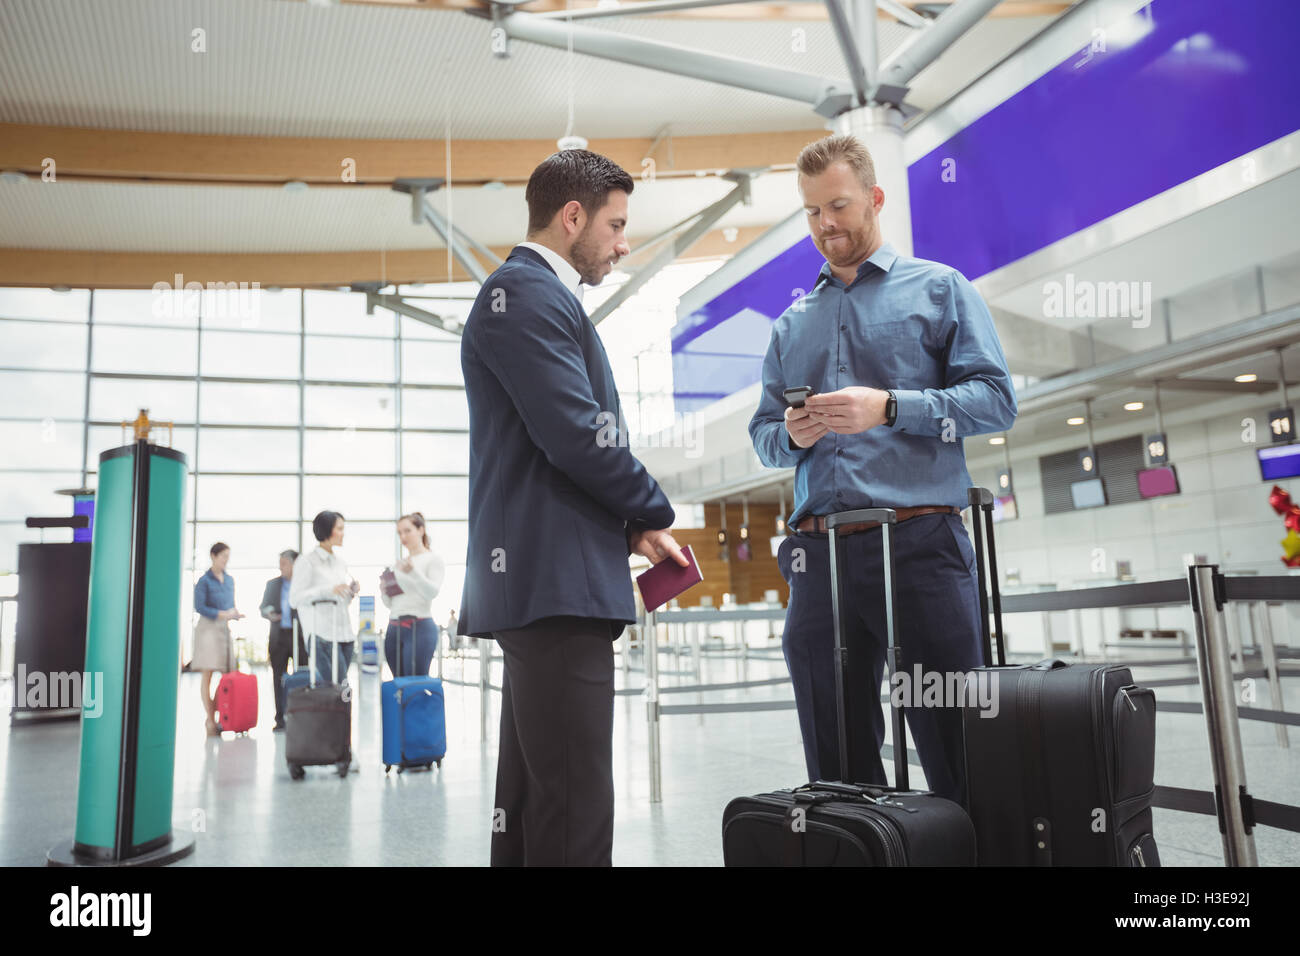 Business people waiting at check-in counter with luggage Stock Photo